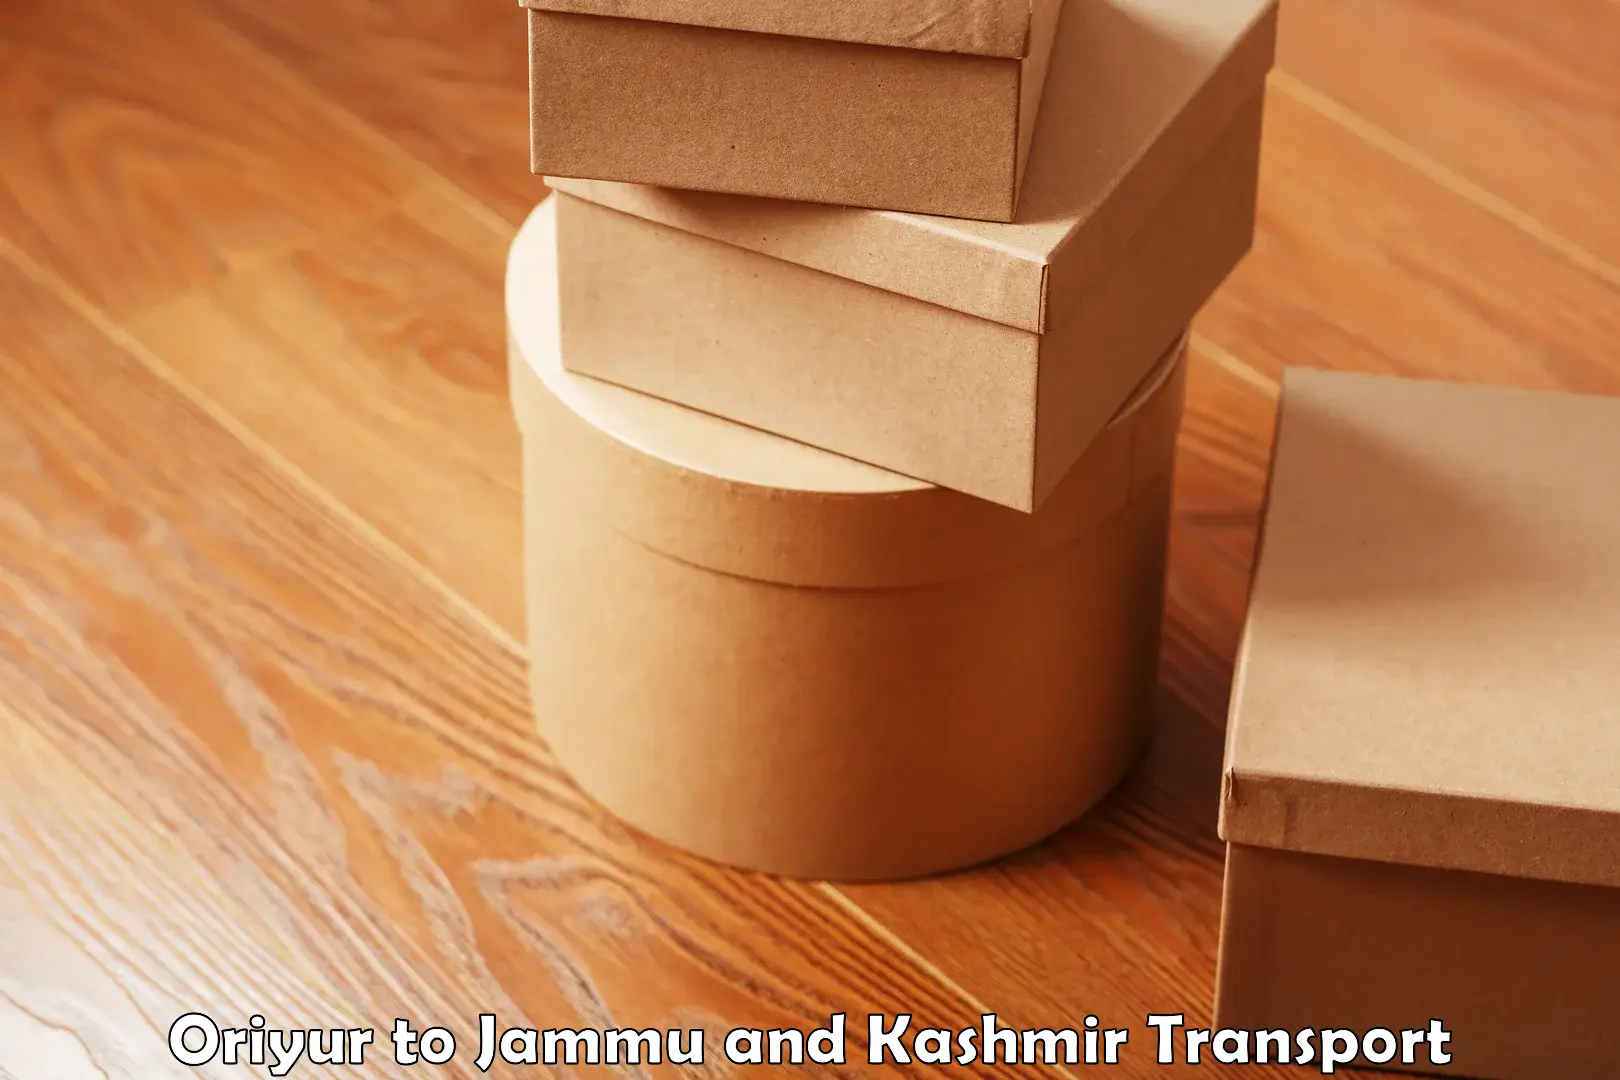 Delivery service Oriyur to Jammu and Kashmir